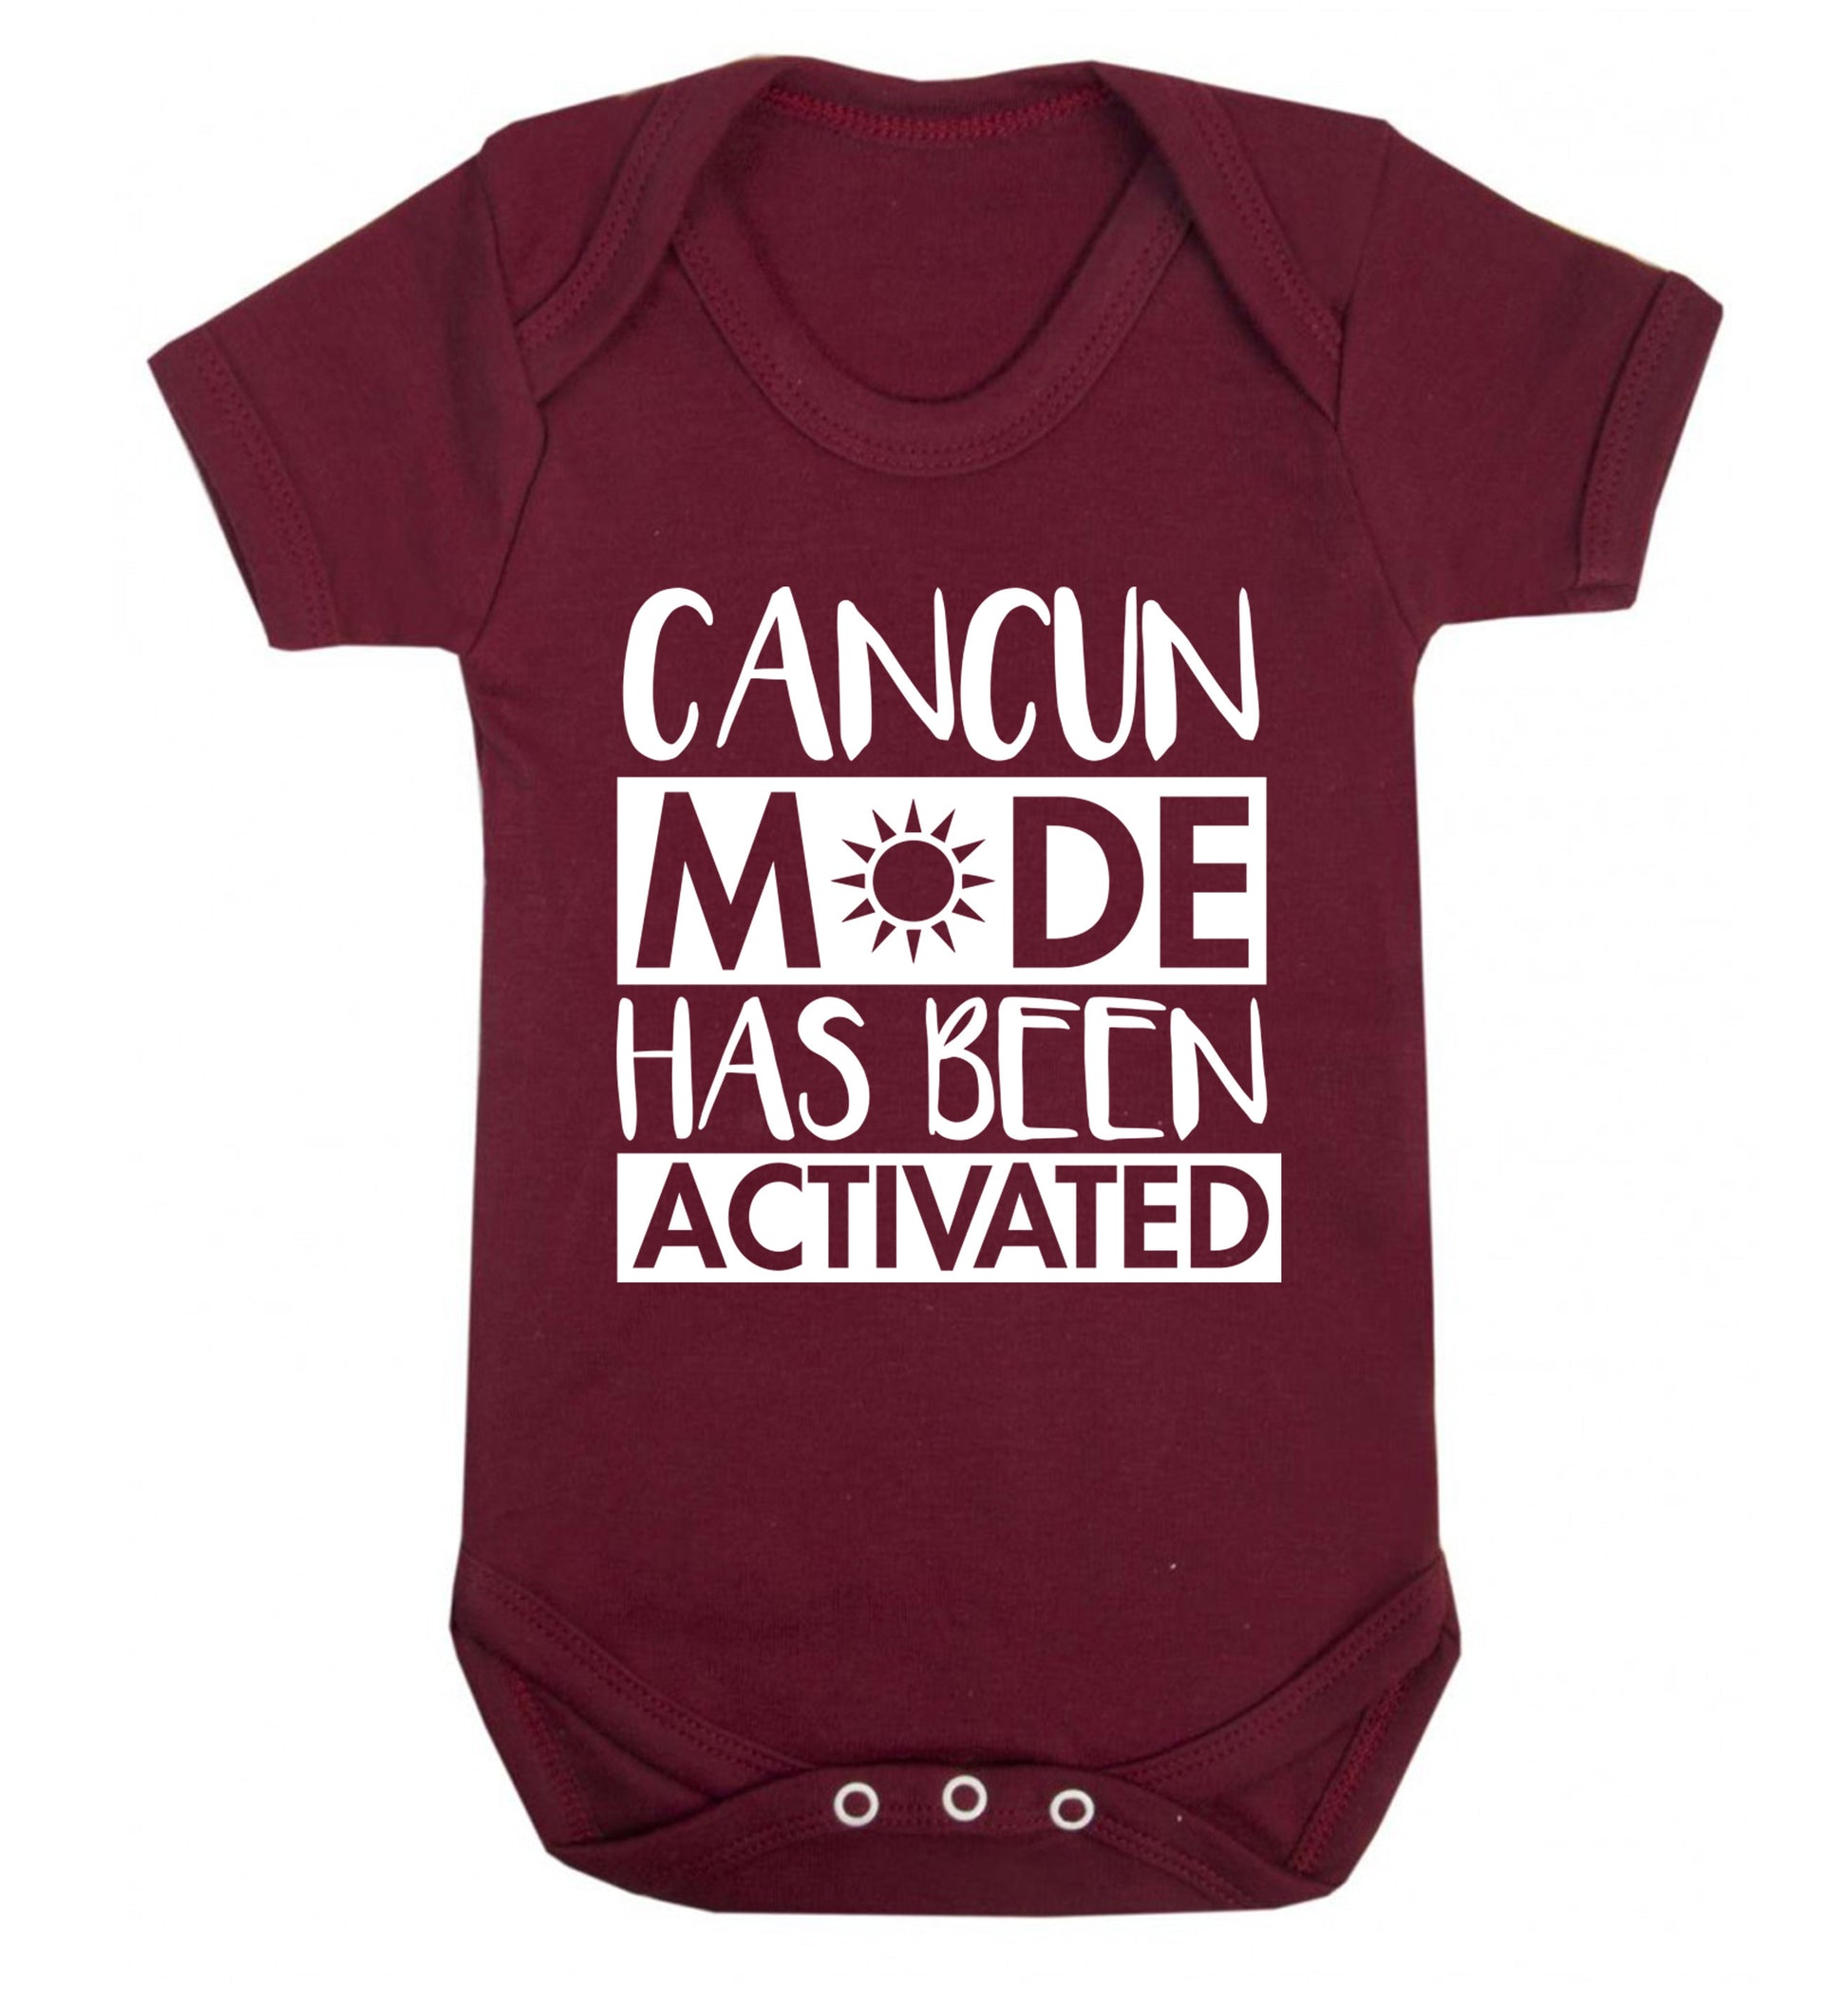 Cancun mode has been activated Baby Vest maroon 18-24 months